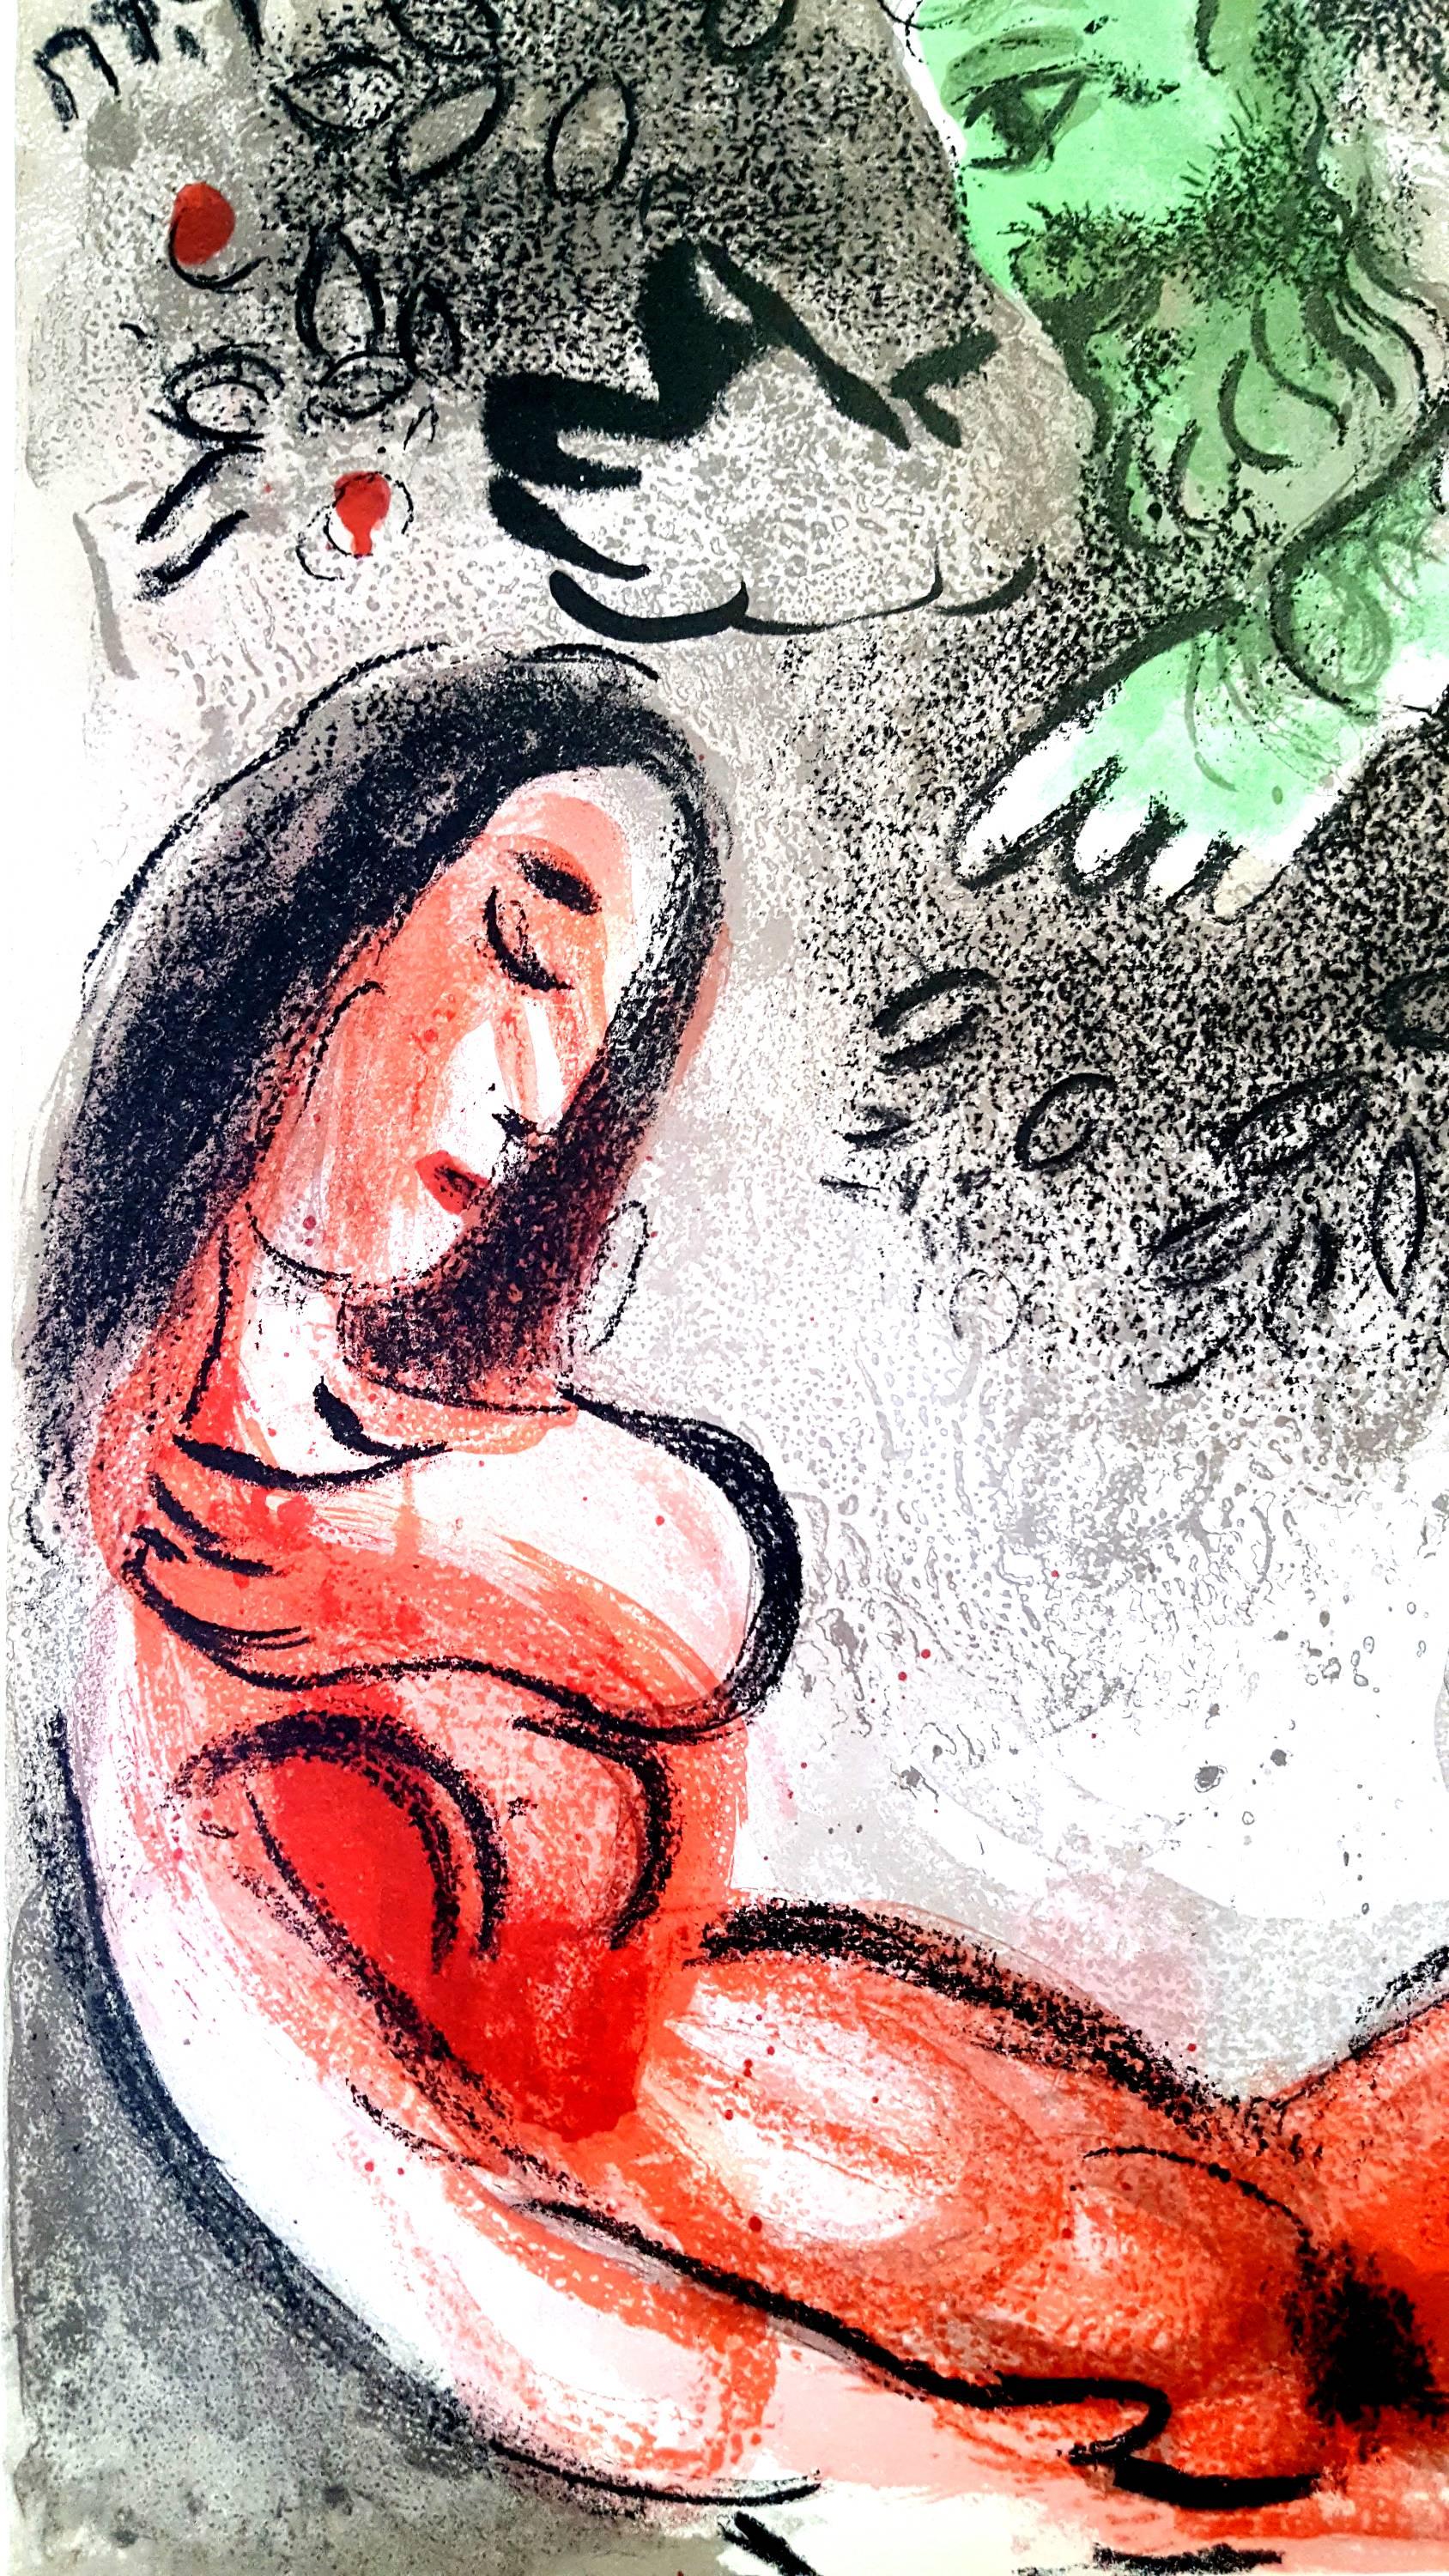 Marc Chagall - The Bible - Eve - Original Lithograph 2